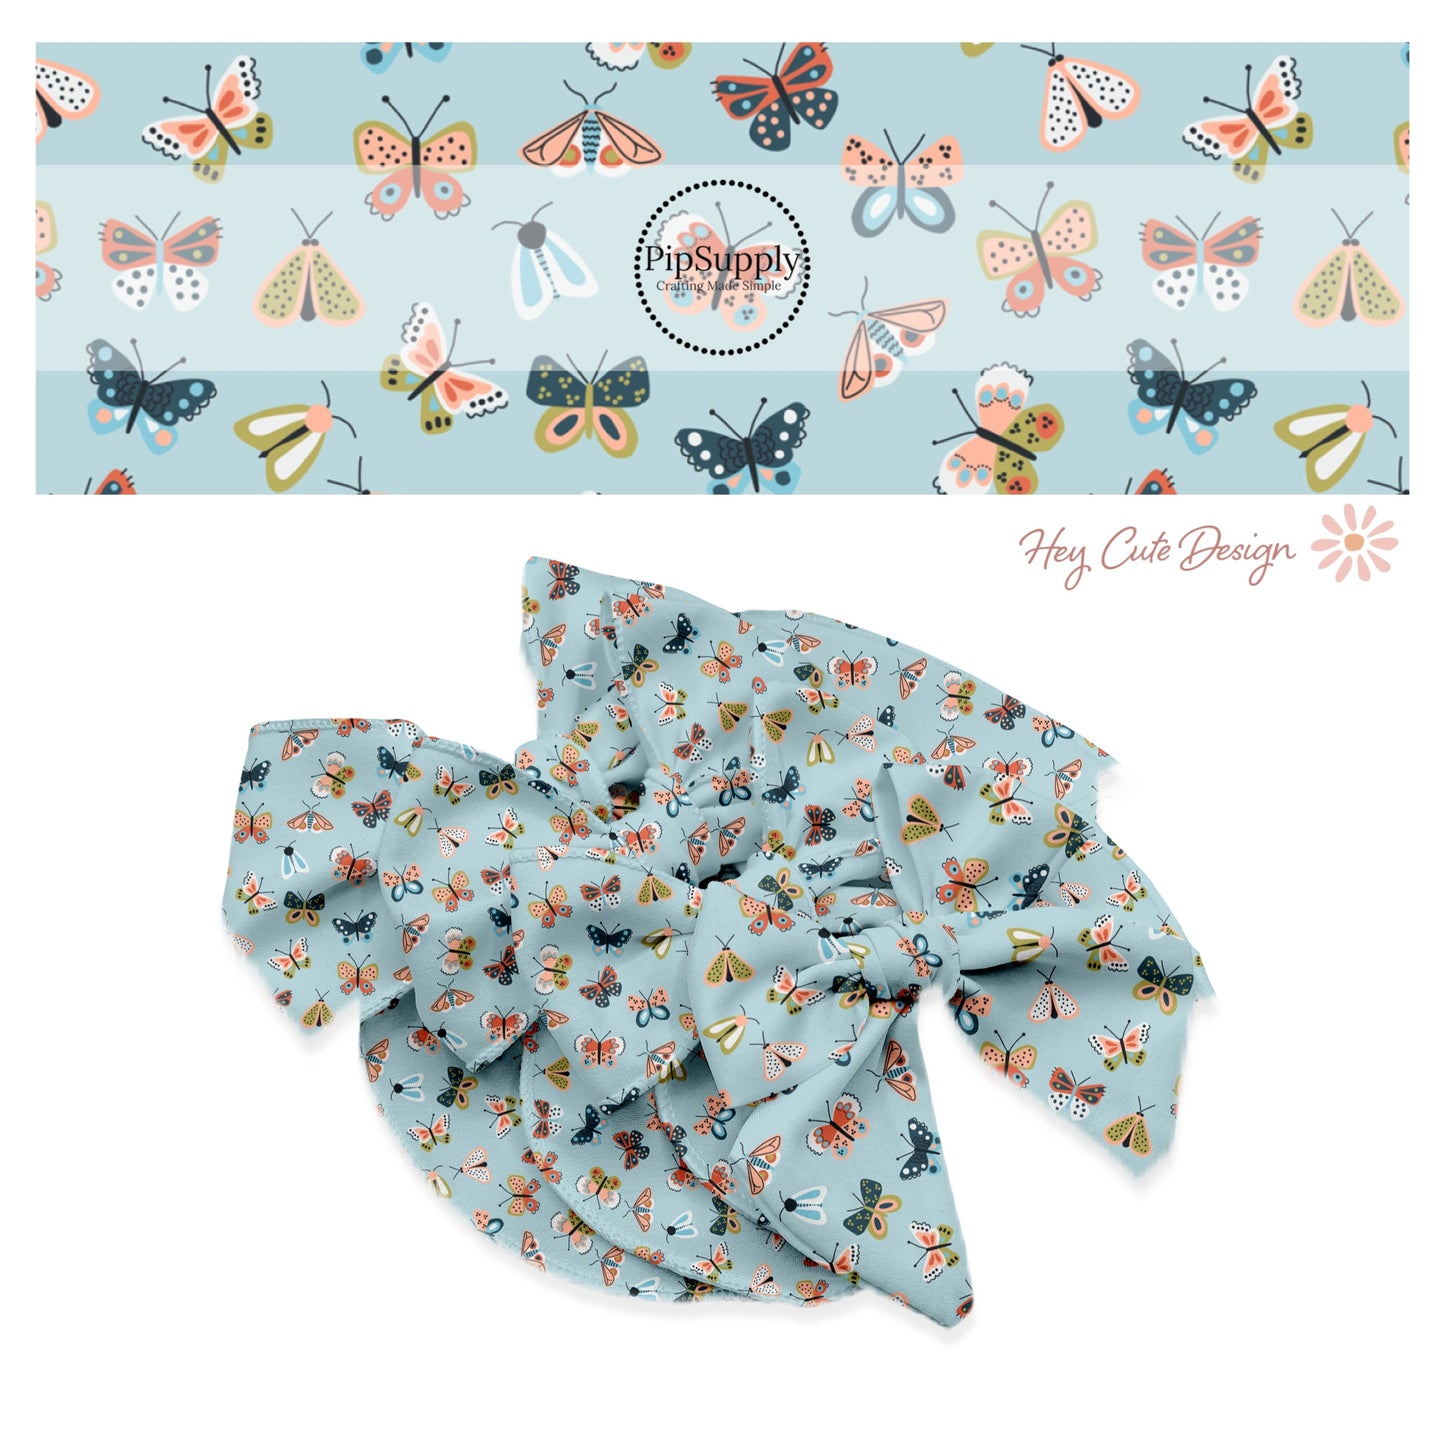 Polka dots and stripes on pink, blue, and green butterflies on blue bow strips